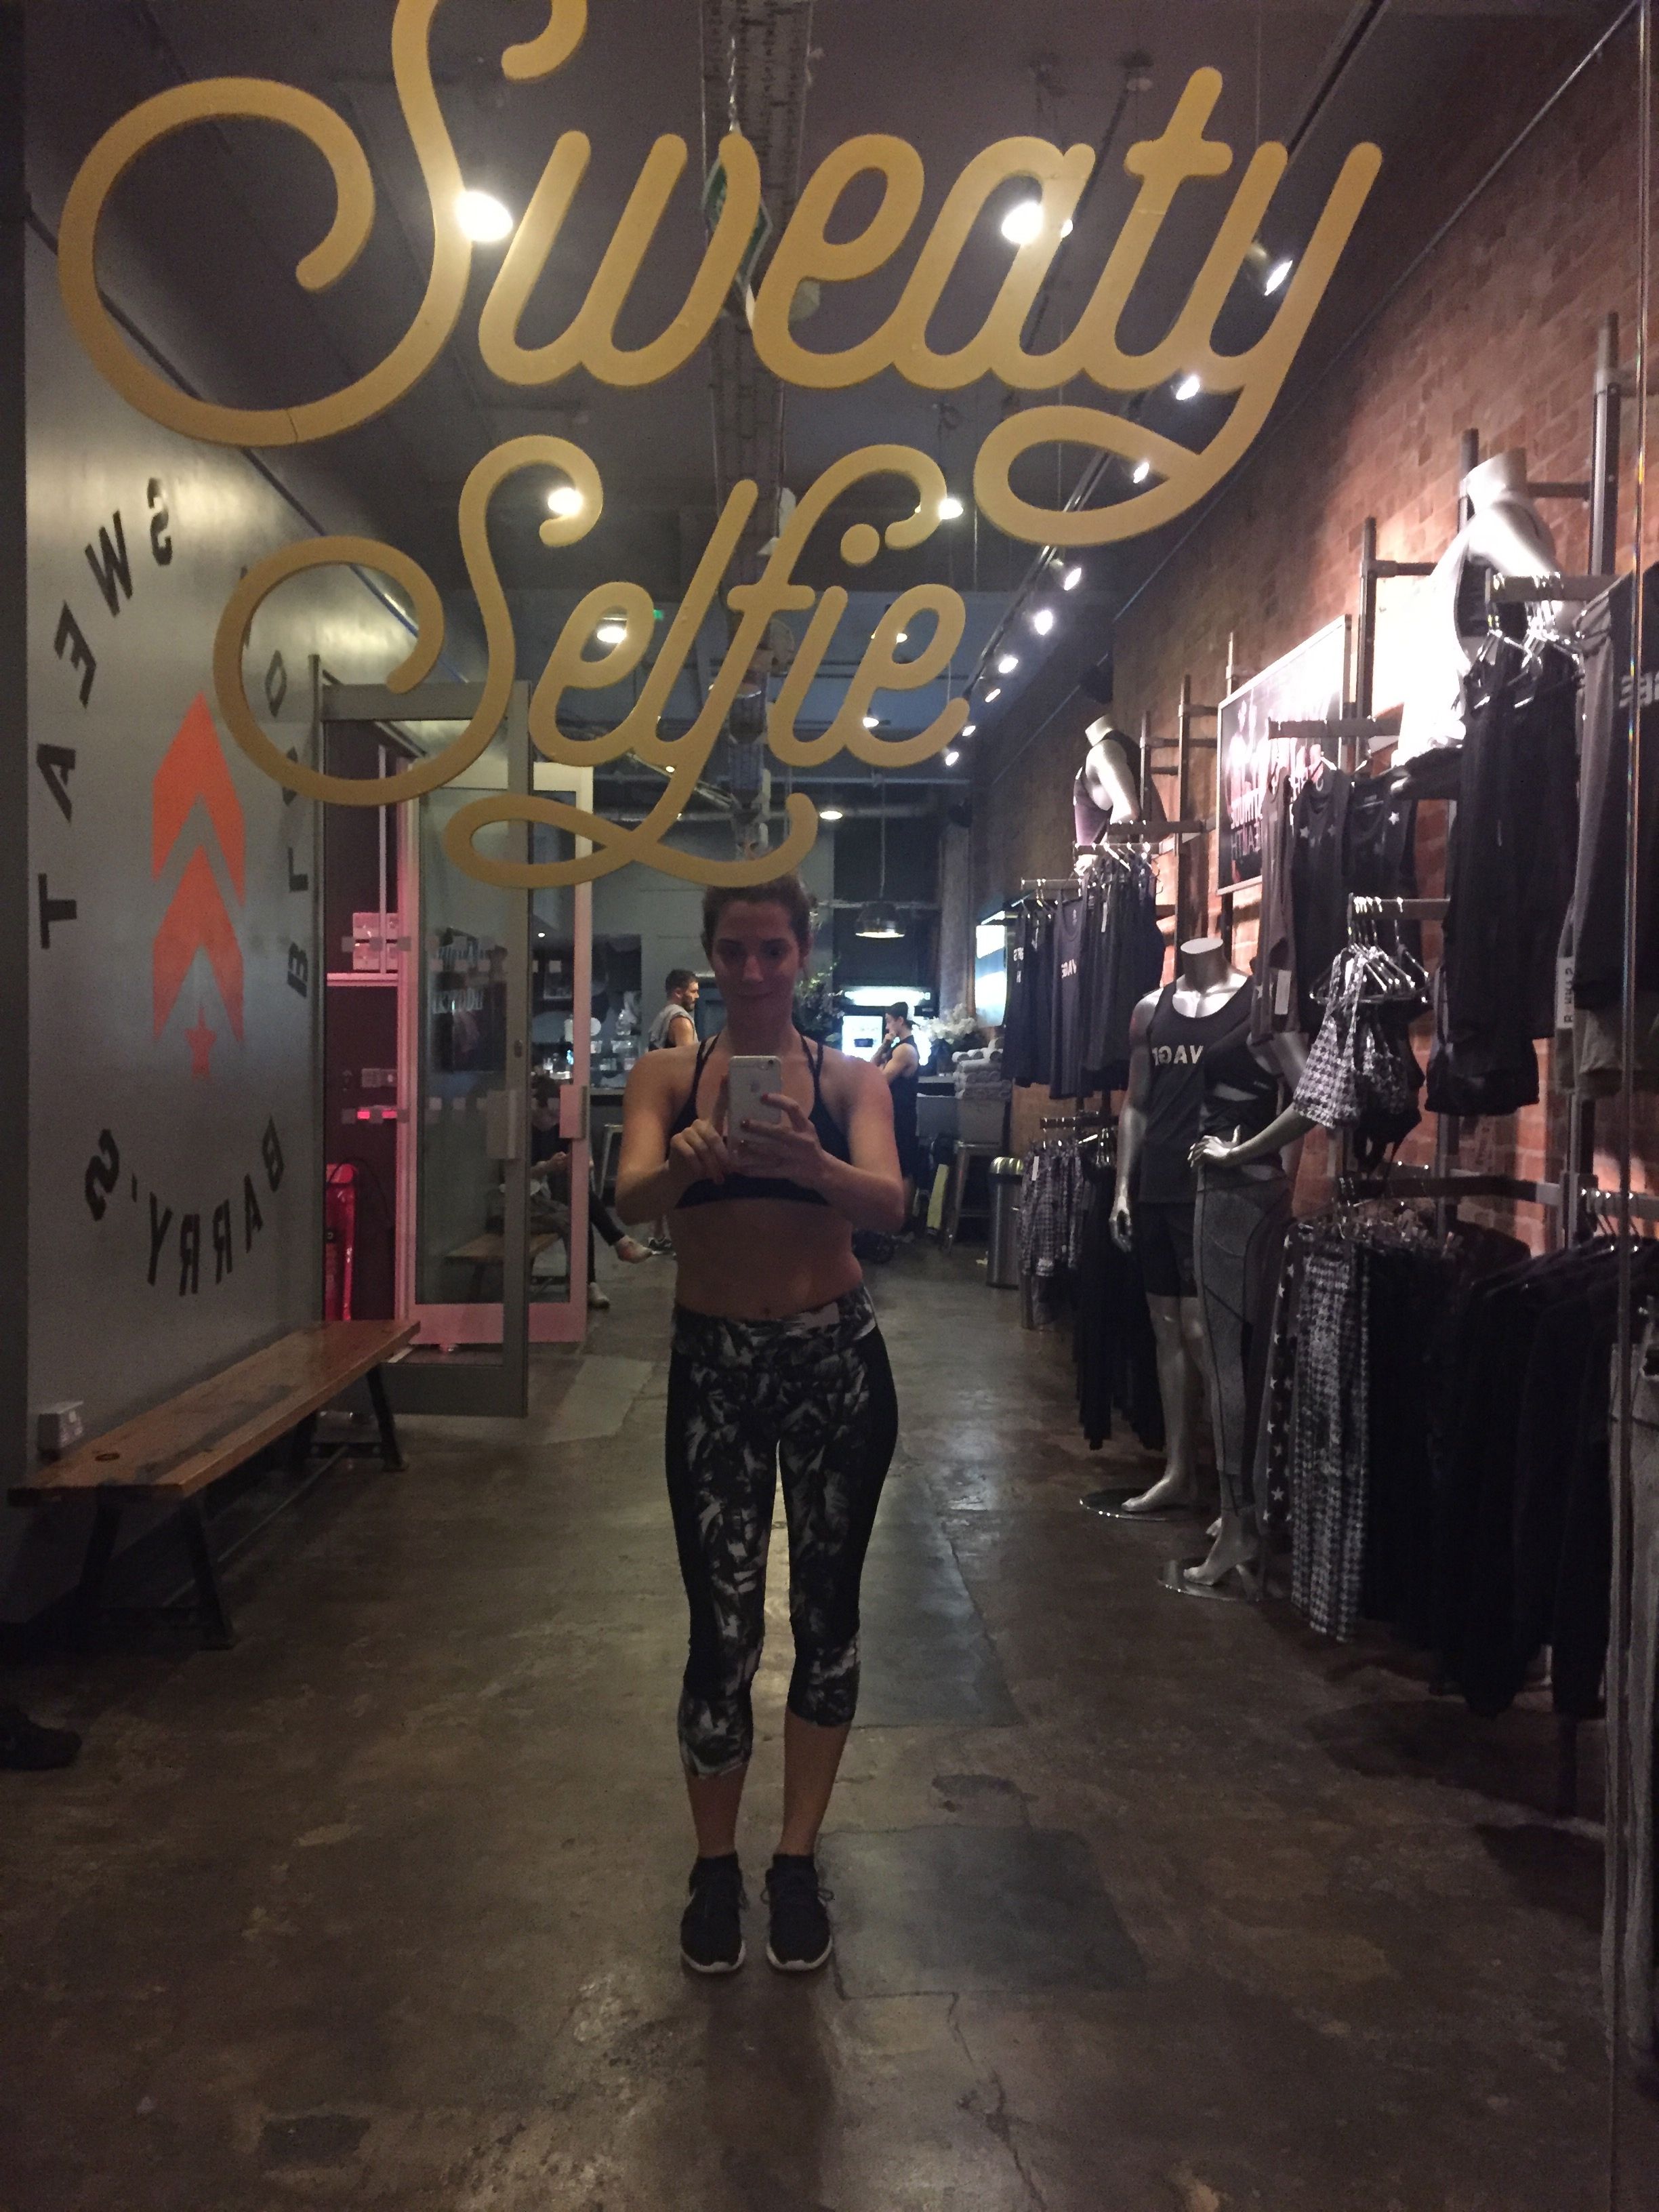 barry's bootcamp, sport, london, londres, 